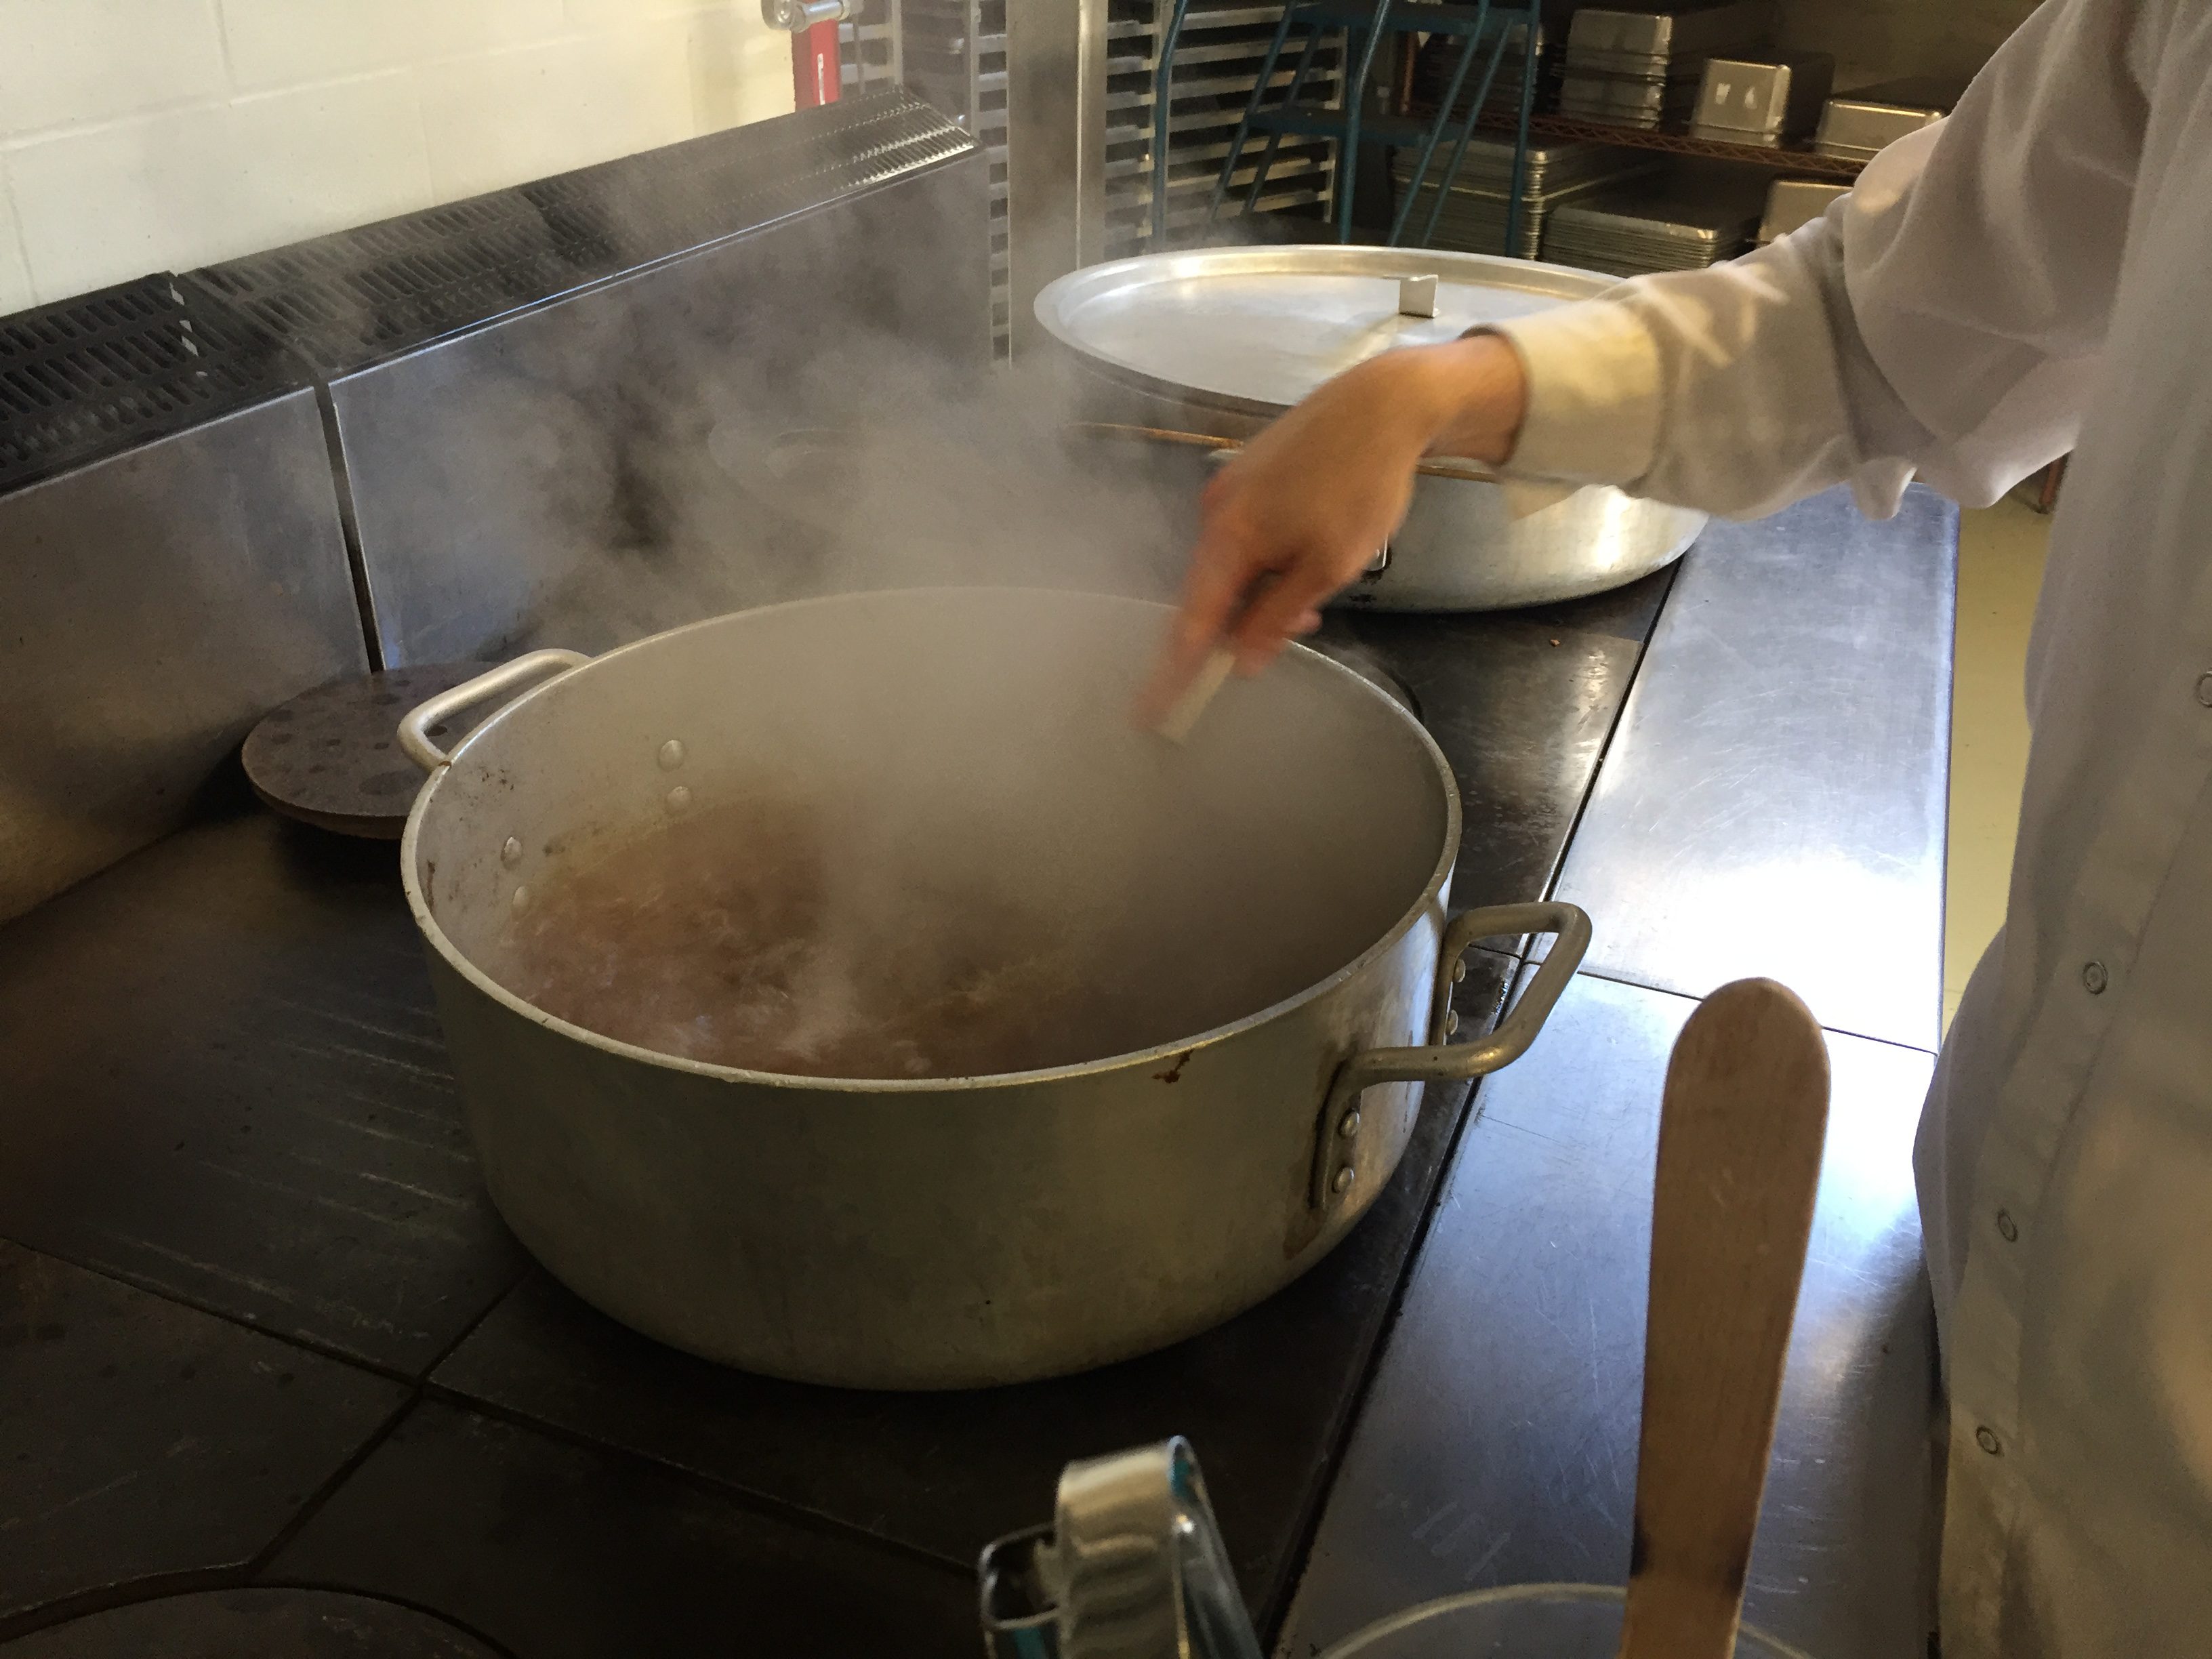 Volunteer cook stirring large pot of broth with whisk.